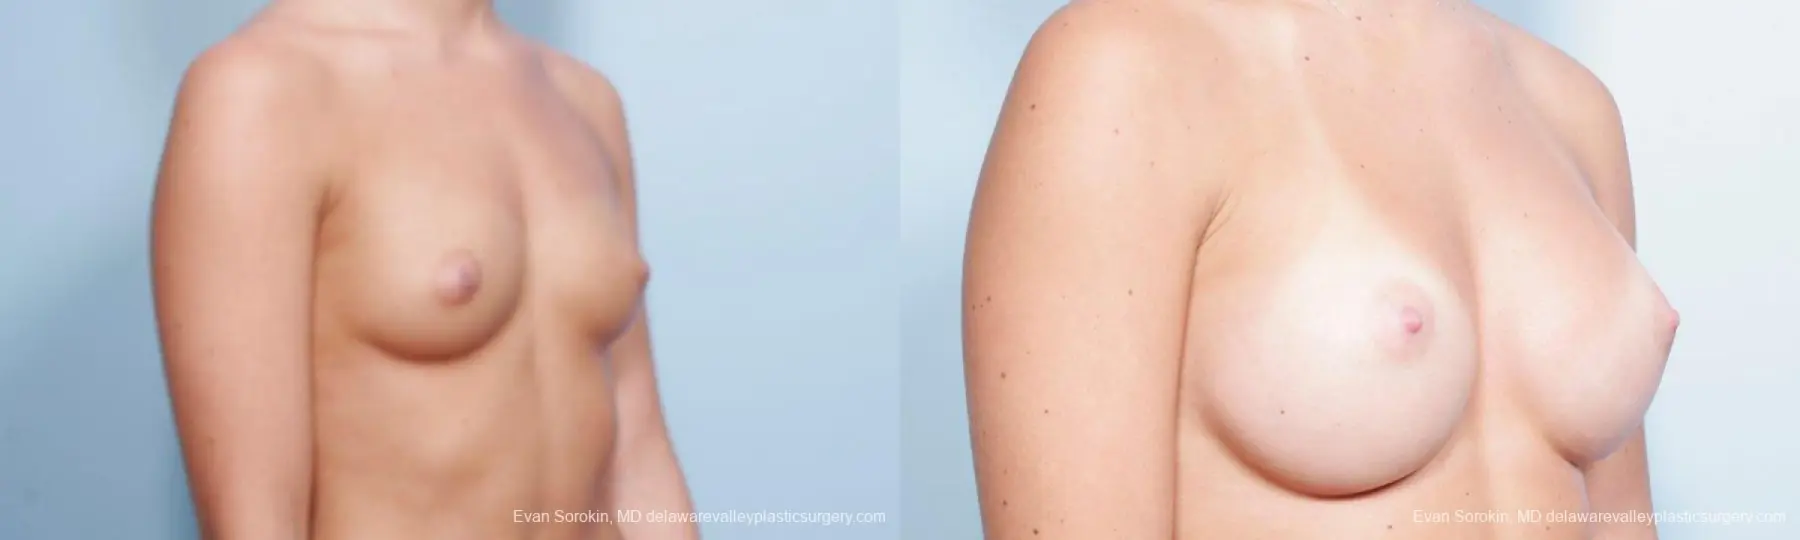 Philadelphia Breast Augmentation 9304 - Before and After 2